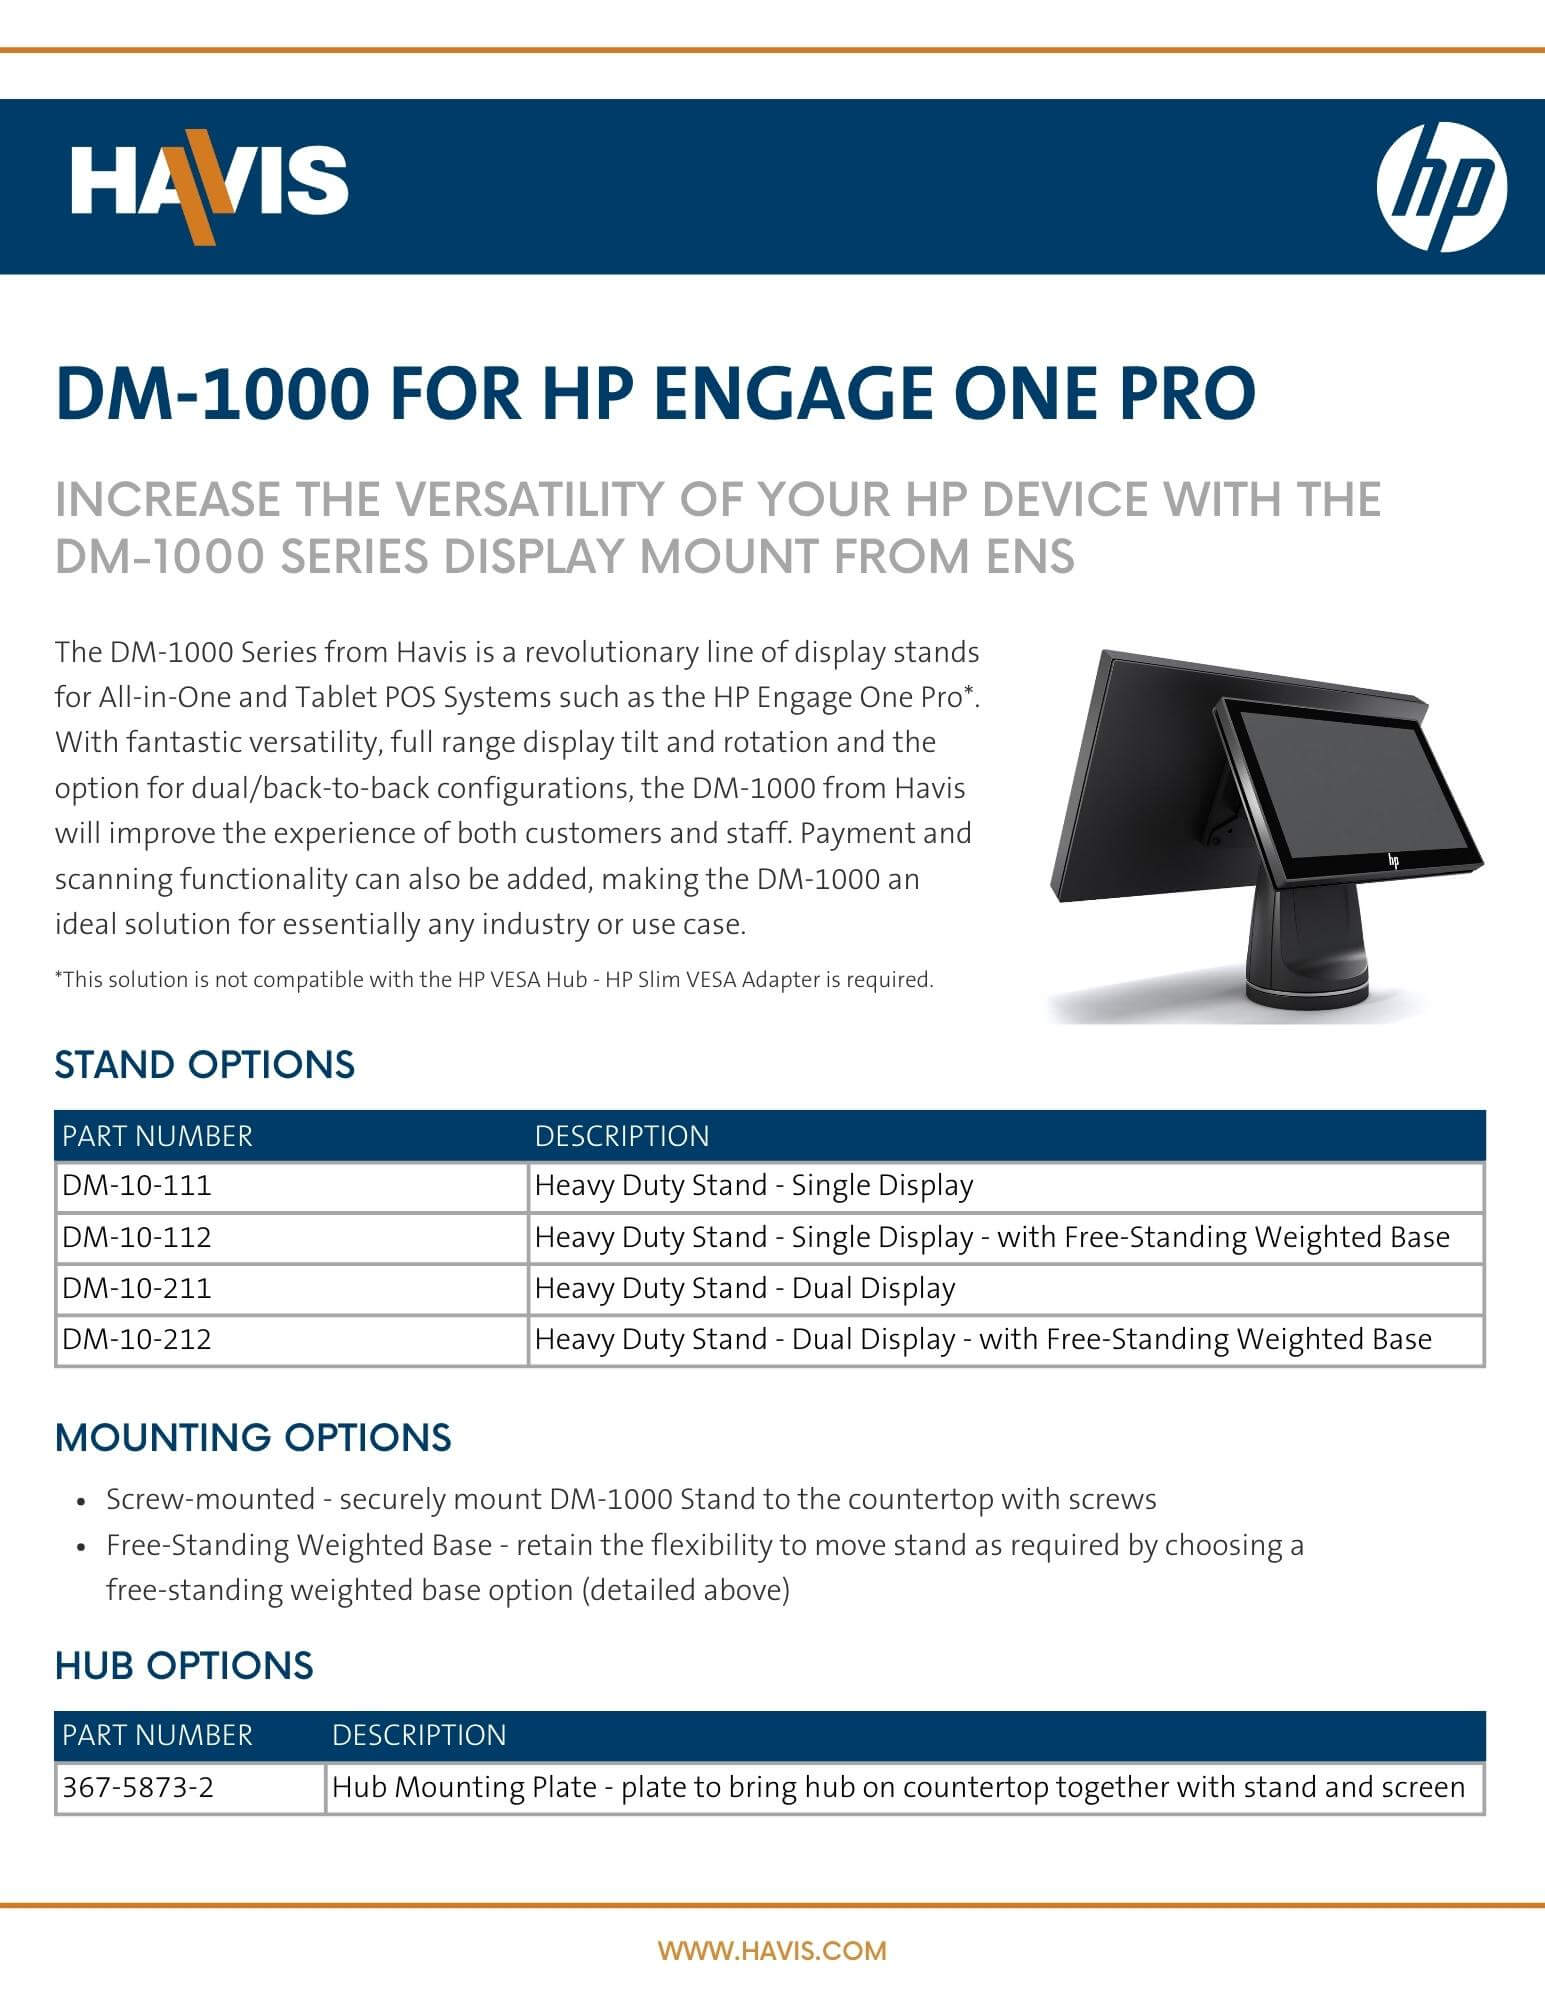 DM-1000 for HP Engage One Pro - Data Sheet